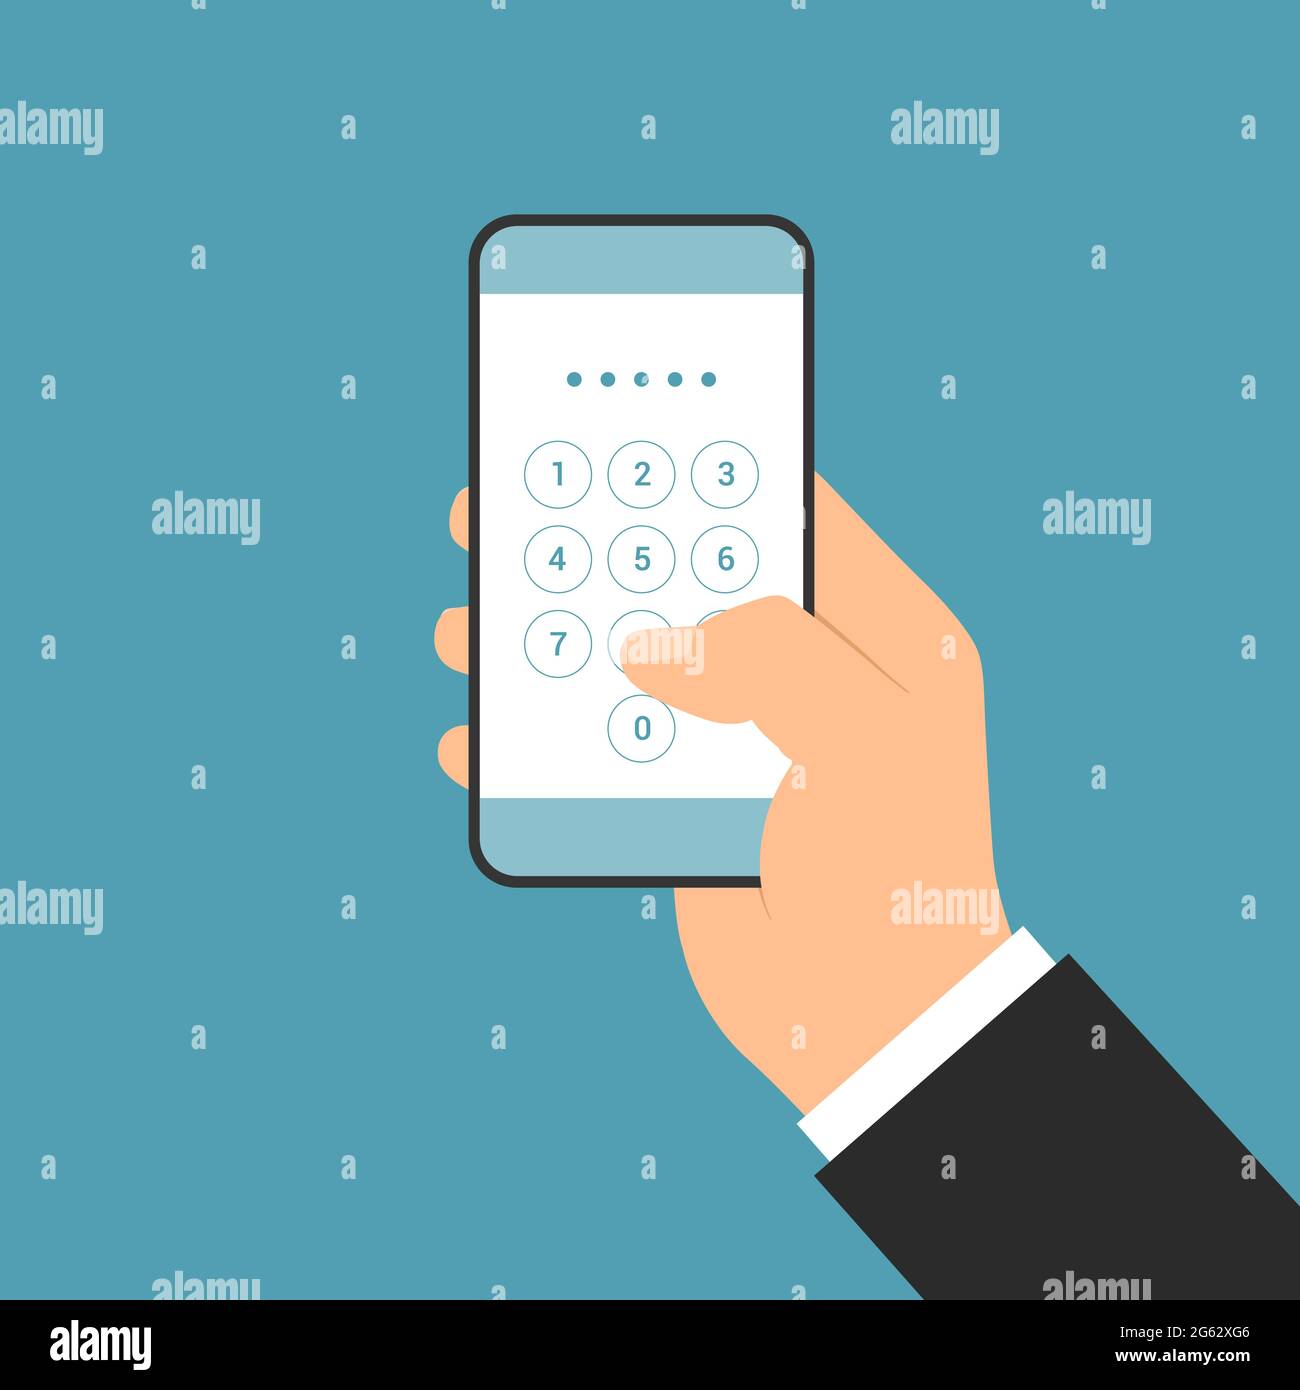 Flat design illustration of manager hand holding smartphone with login screen and entering PIN code - vector Stock Vector